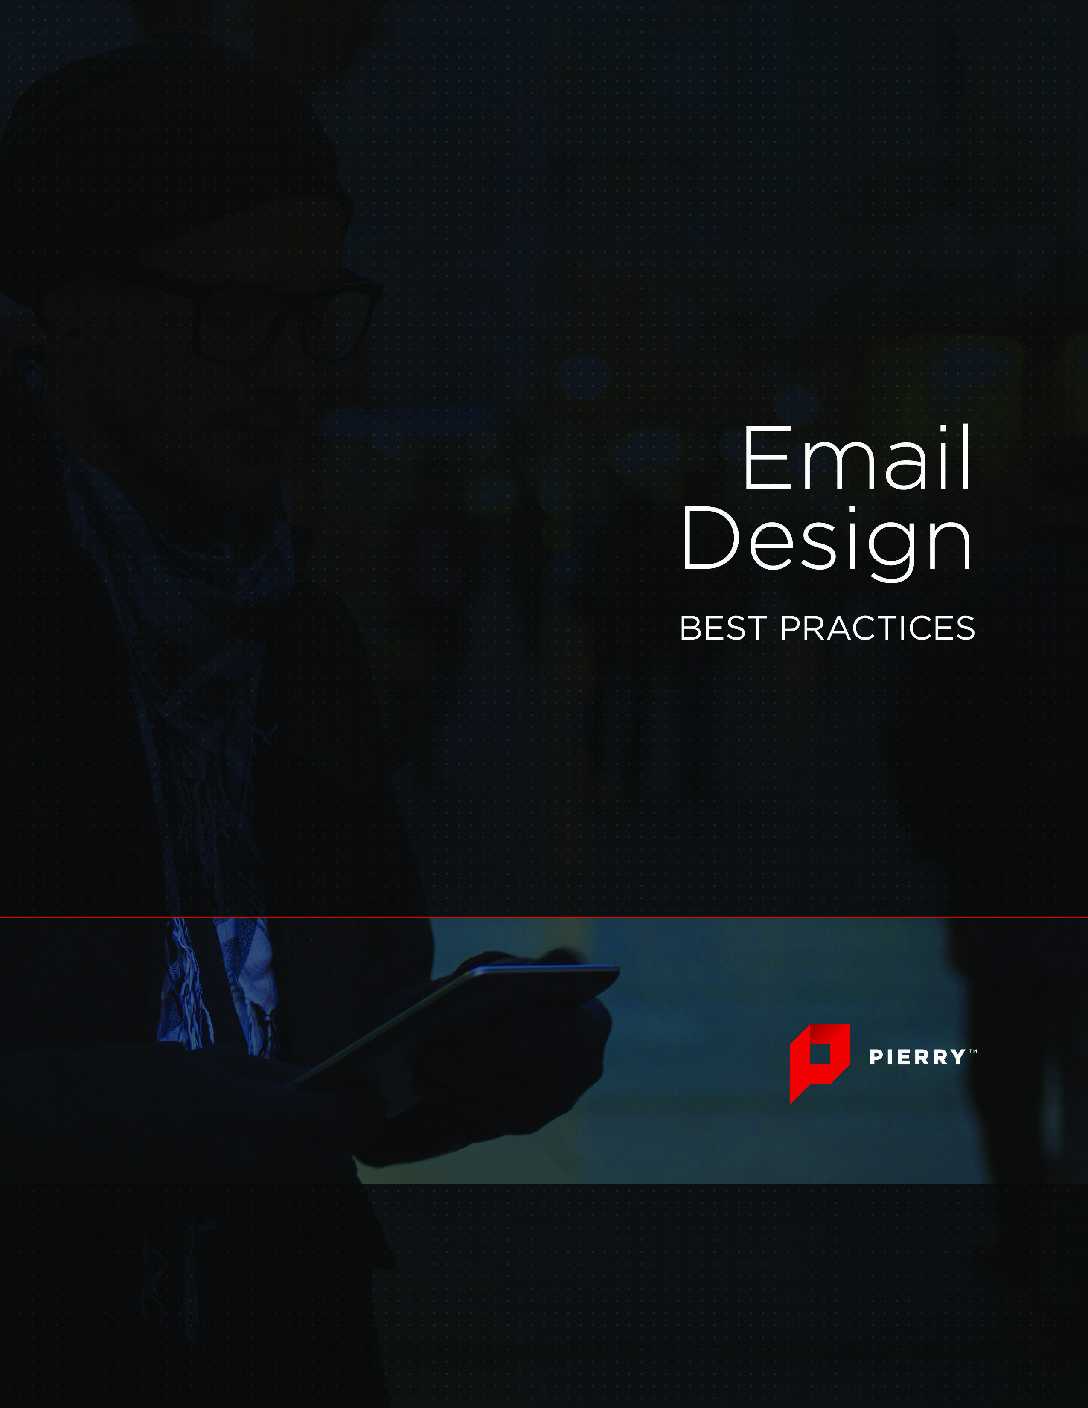 Email Design Best Practices Pierry Inc